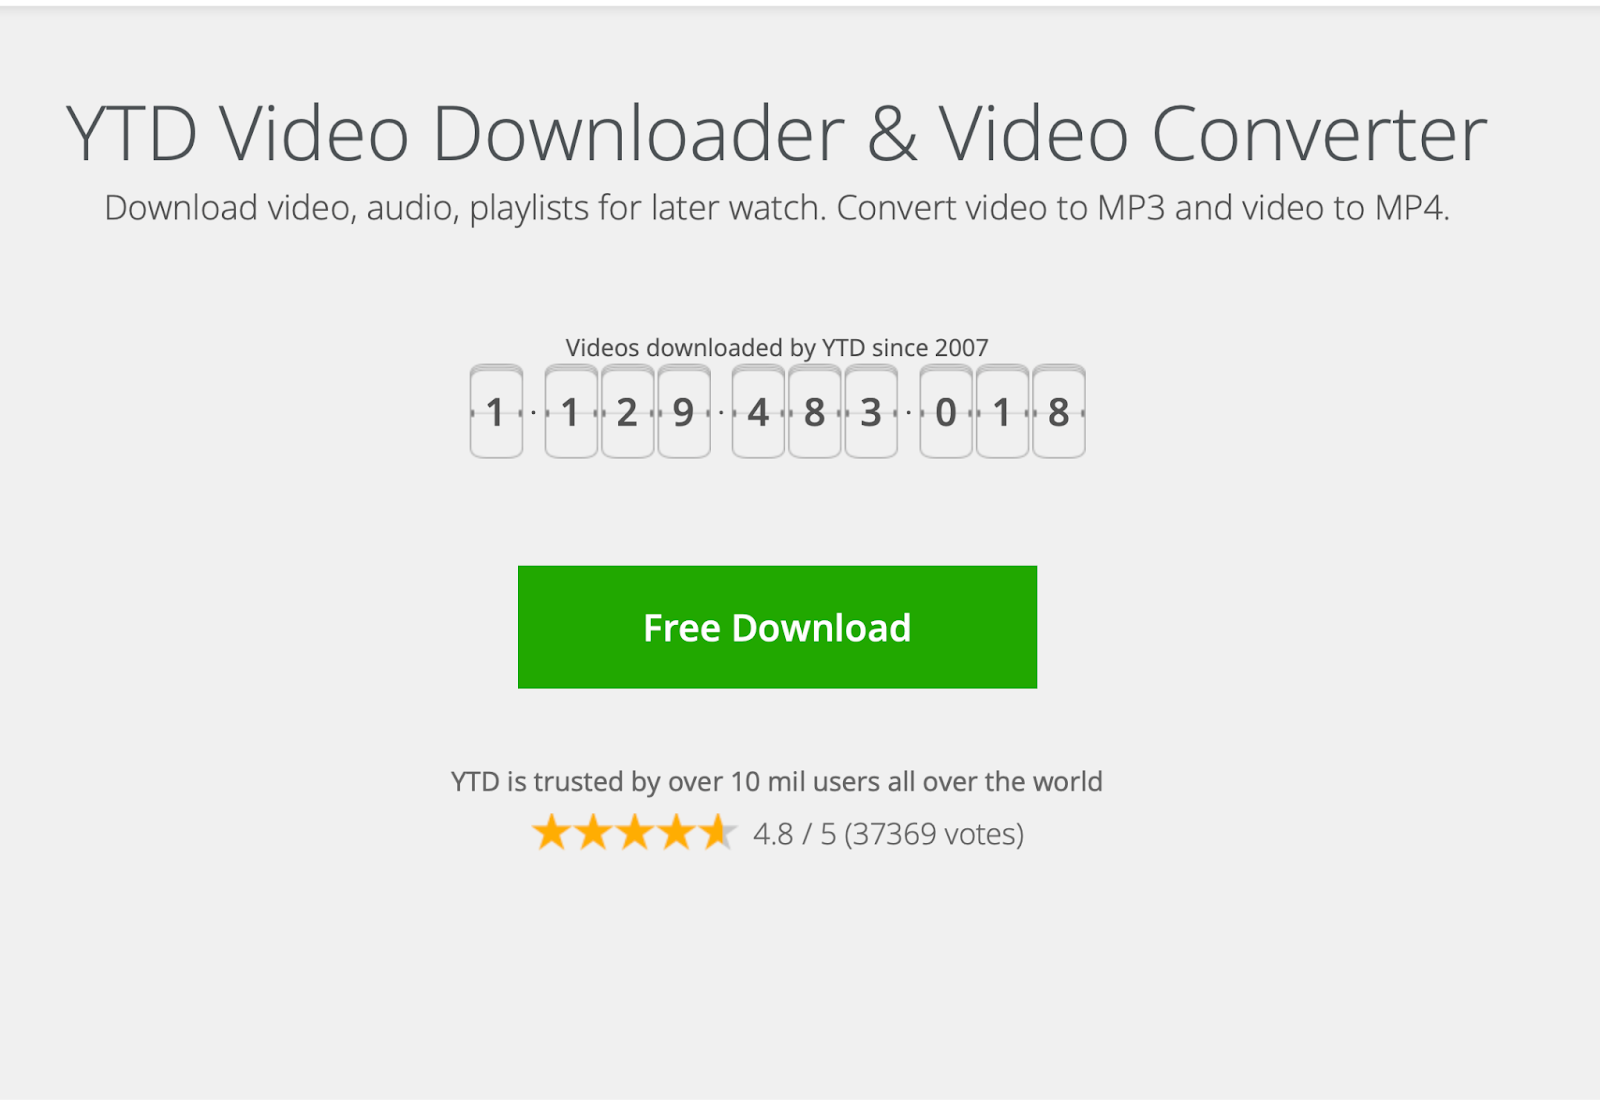 How to download YouTube videos with YTD Downloader